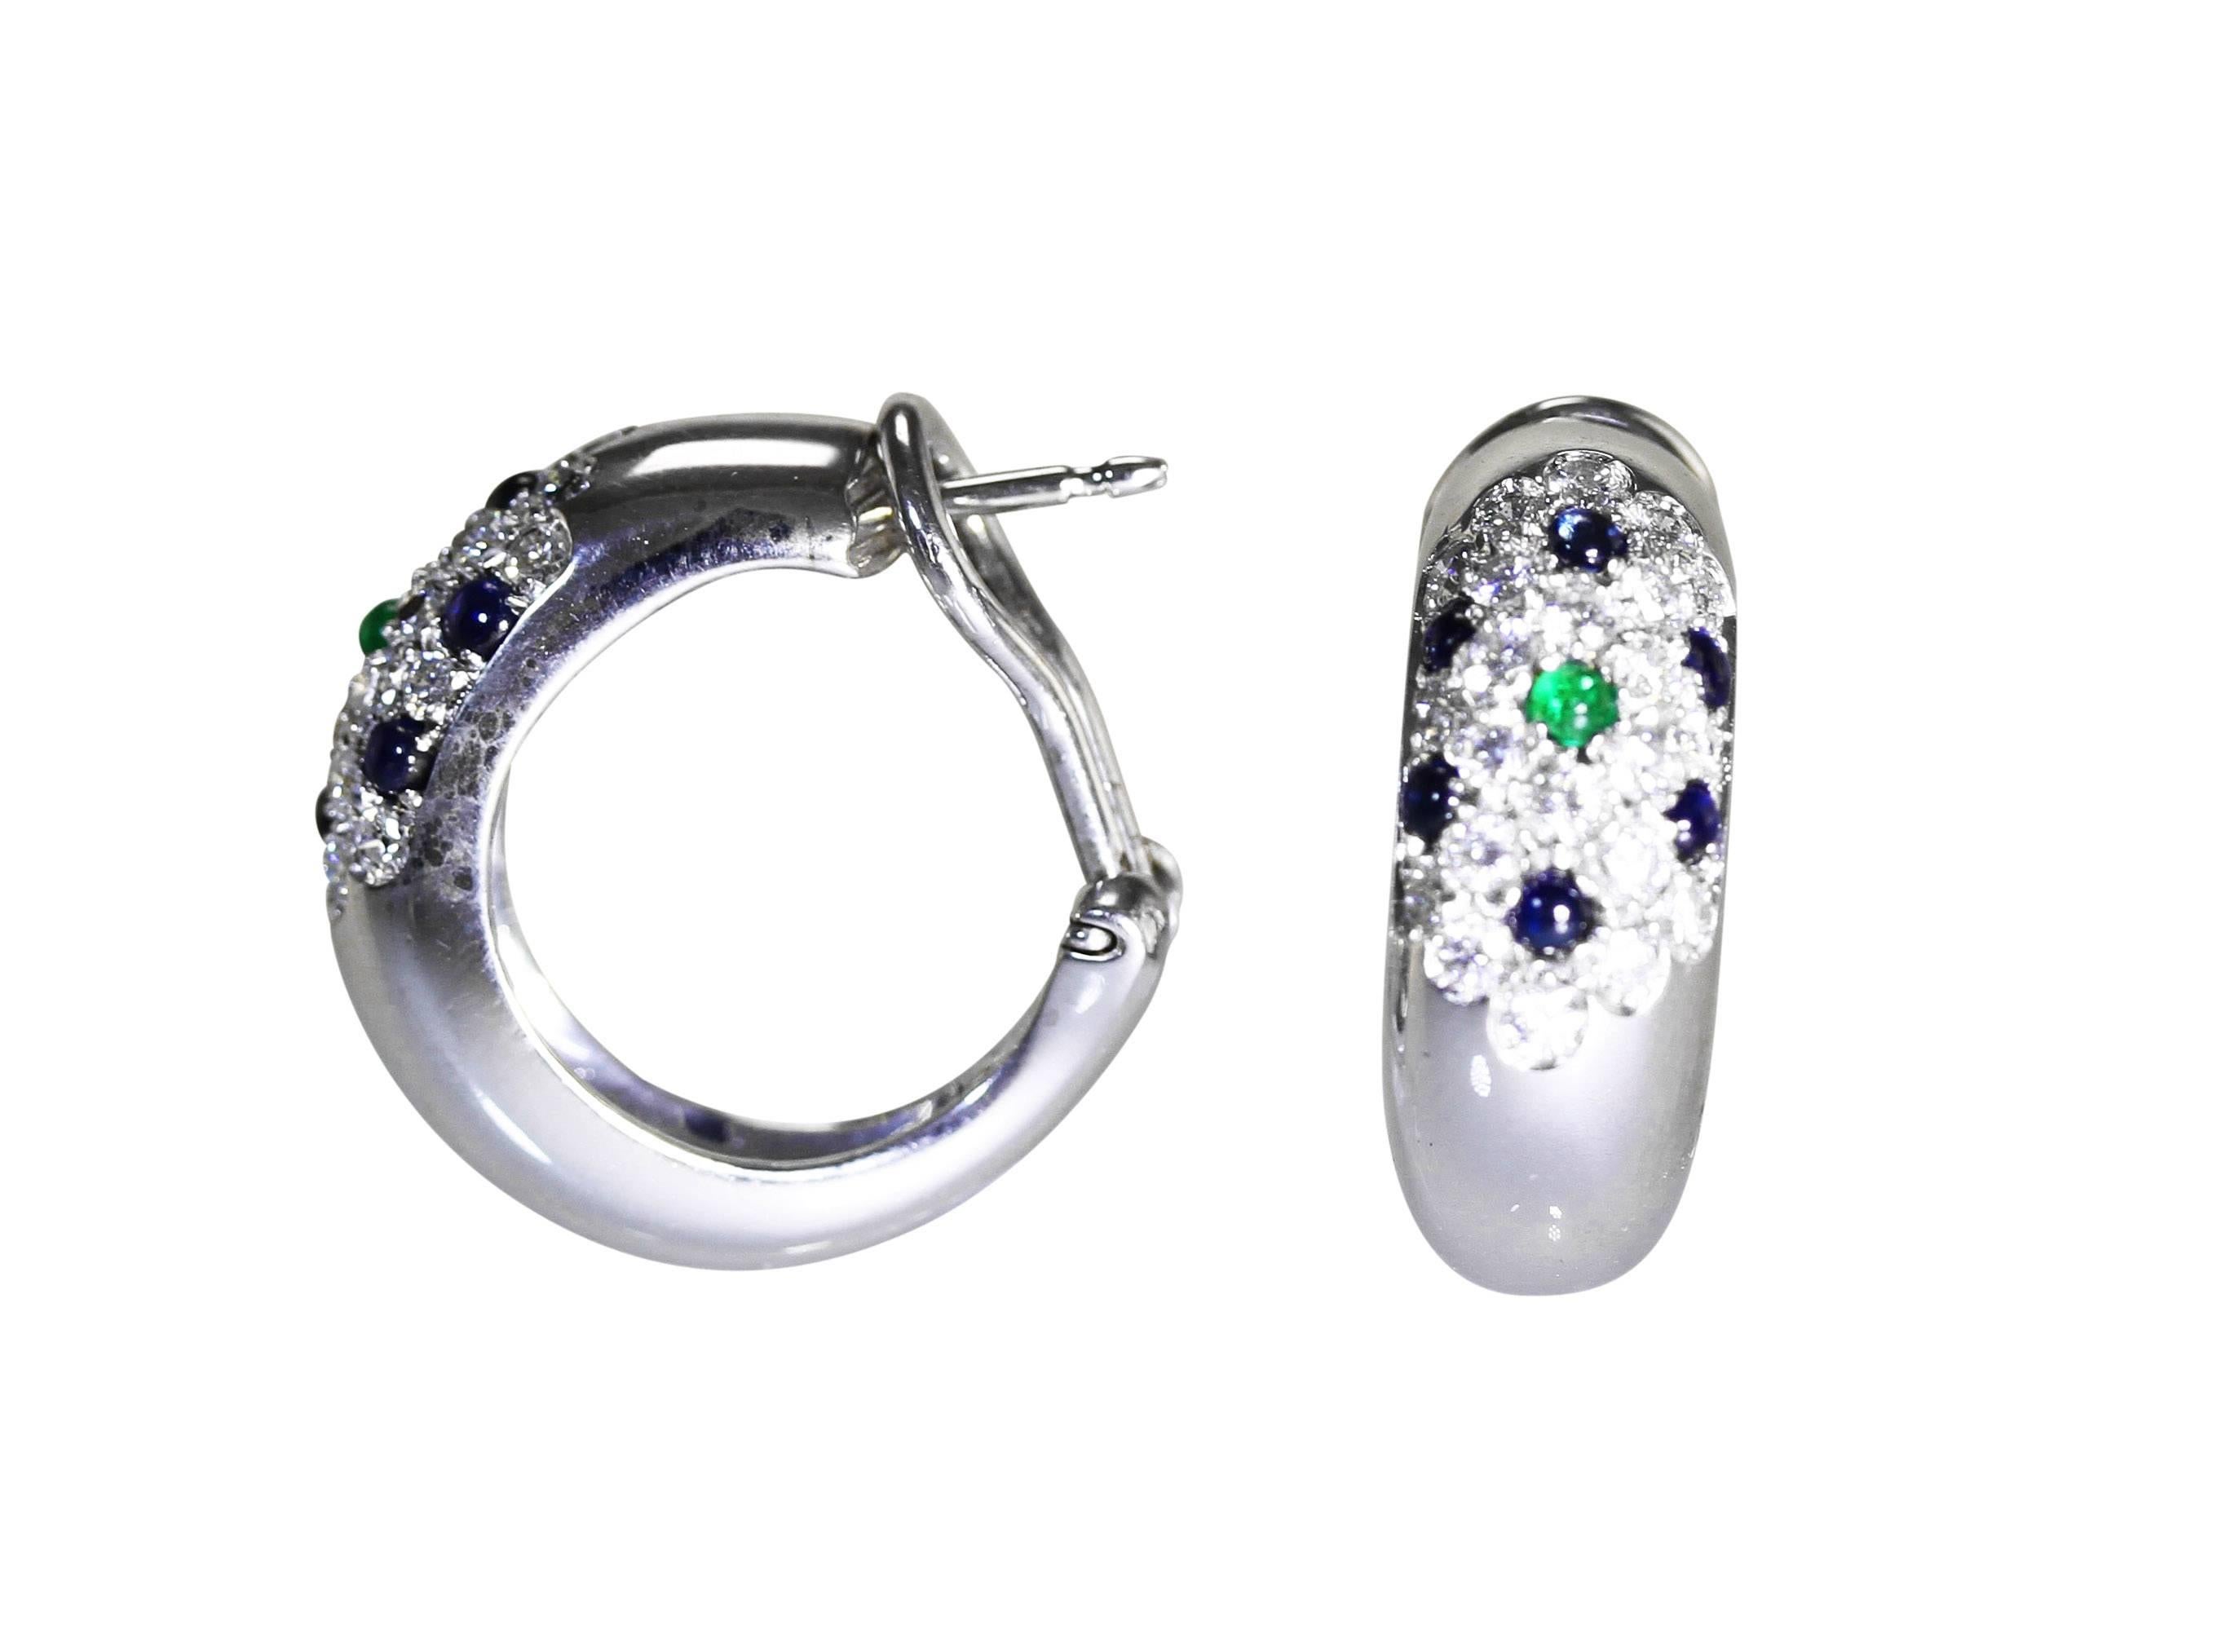 A pair of 18 karat white gold, emerald, sapphire and diamond hoop earclips by Cartier, designed as half hoops pave-set at the tops with 44 round diamonds weighing approximately 1.50 carats, accented by 2 cabochon emeralds weighing approximately 0.20